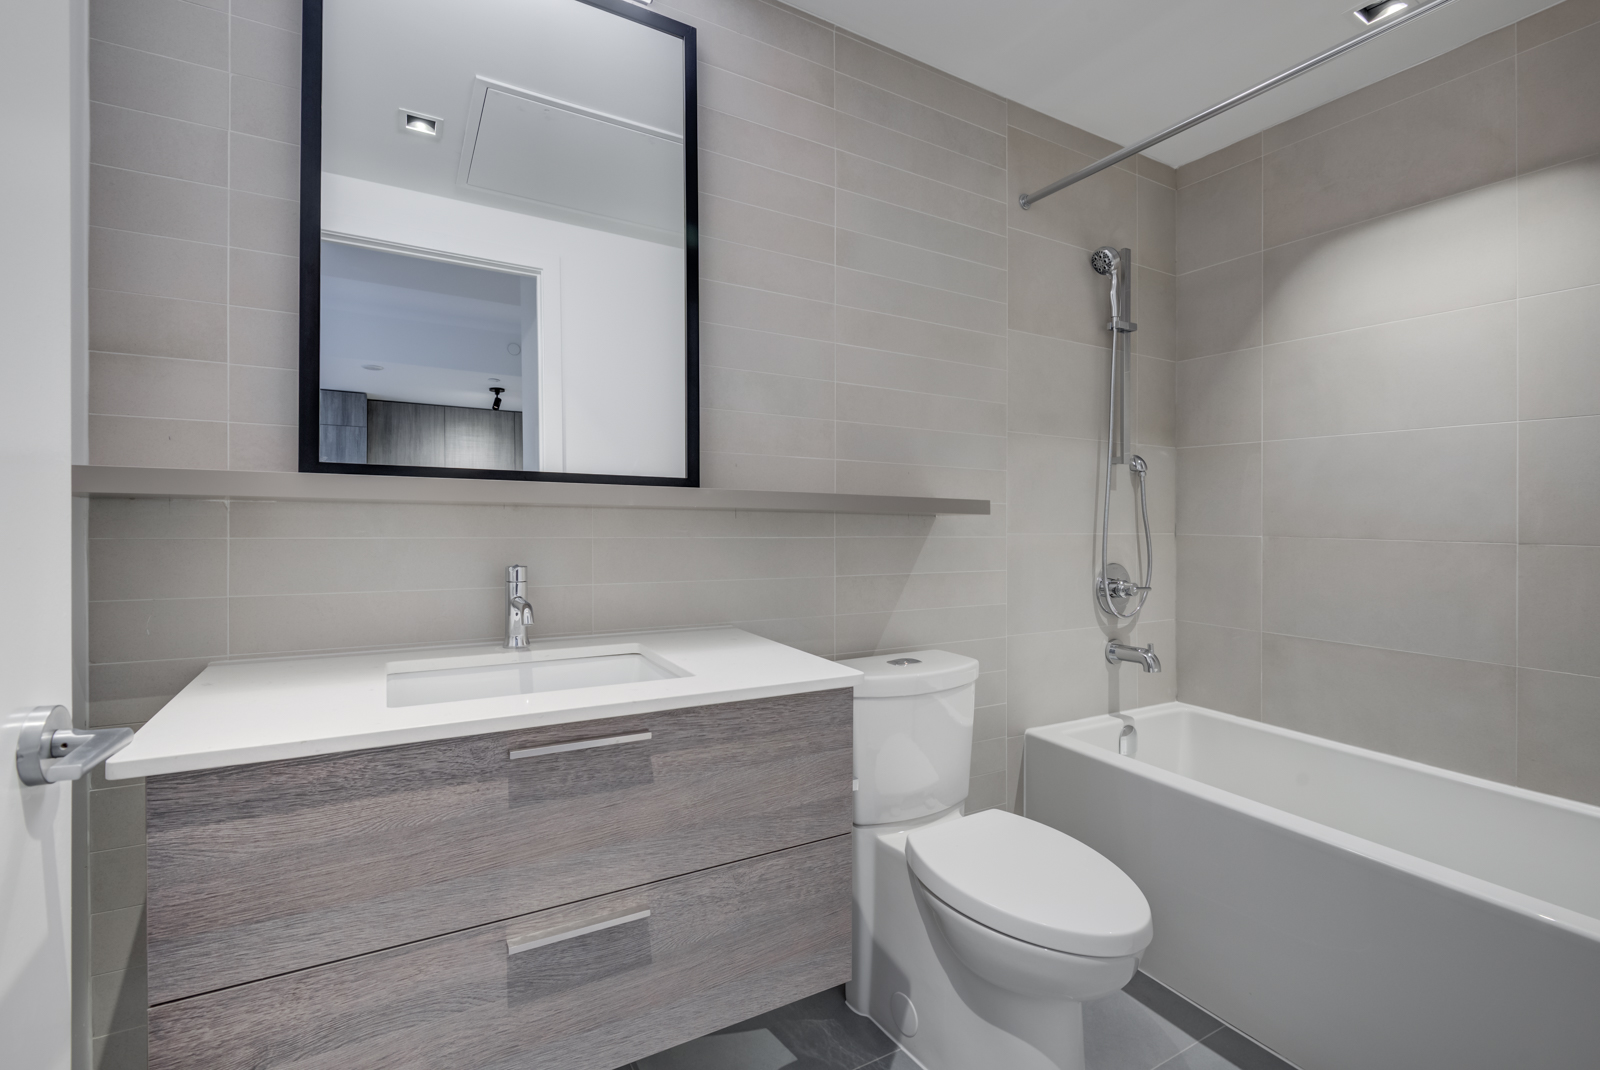 4-piece bathroom with white soaker tub, toilet, vanity, mirror and brown cabinets and tiles.